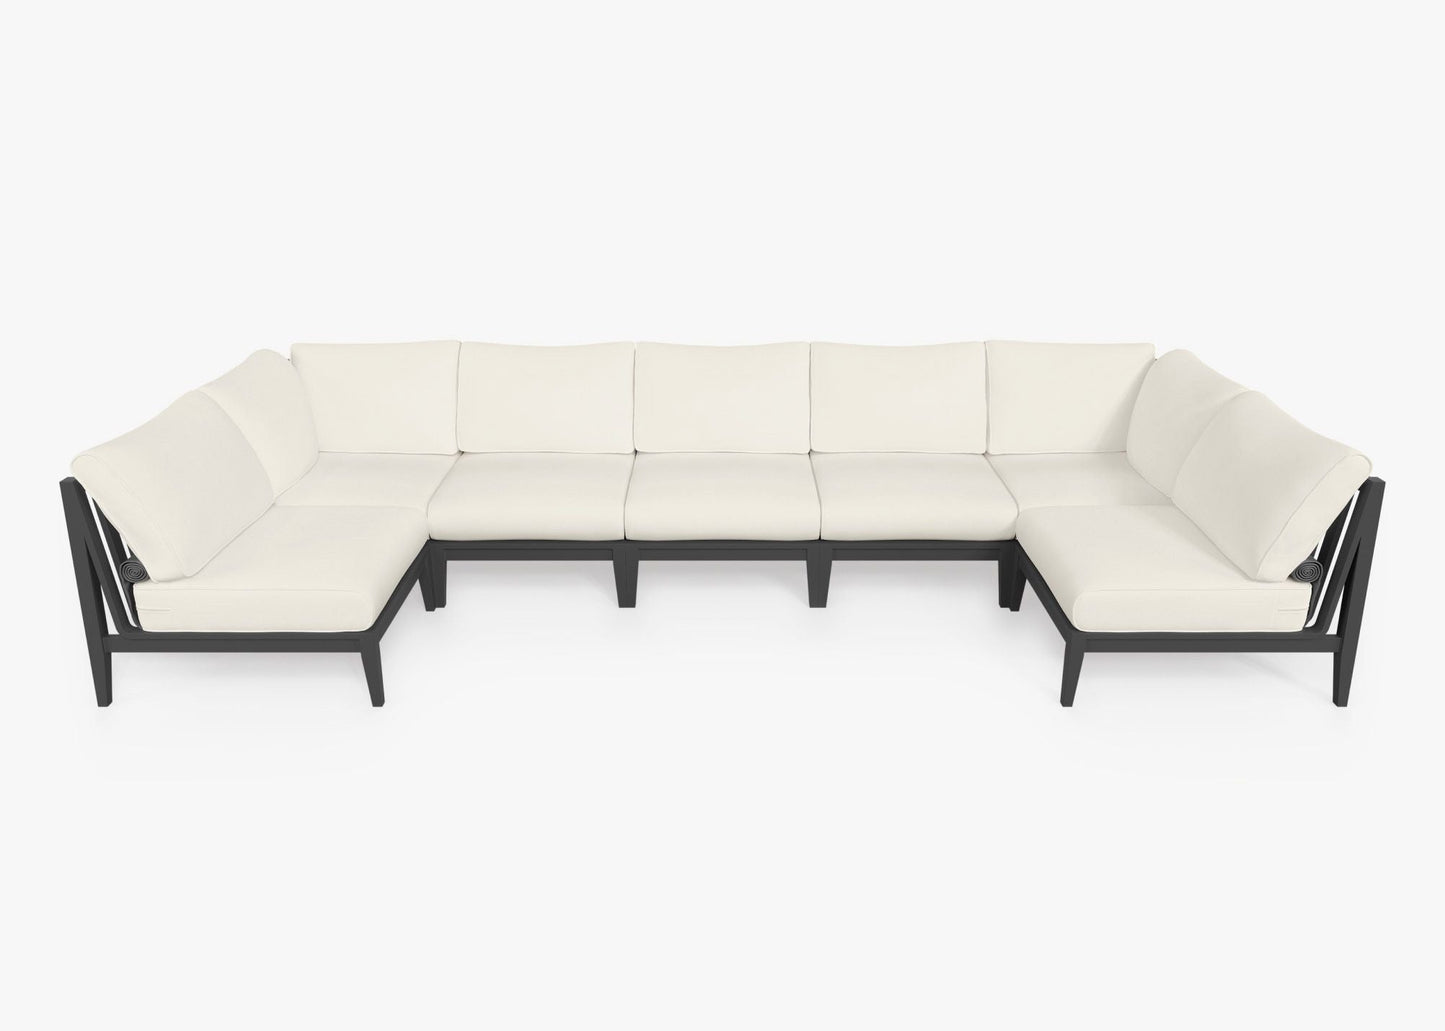 Live Outer 156" x 64" Charcoal Aluminum Outdoor U Sectional 7-Seat With Palisades Cream Cushion